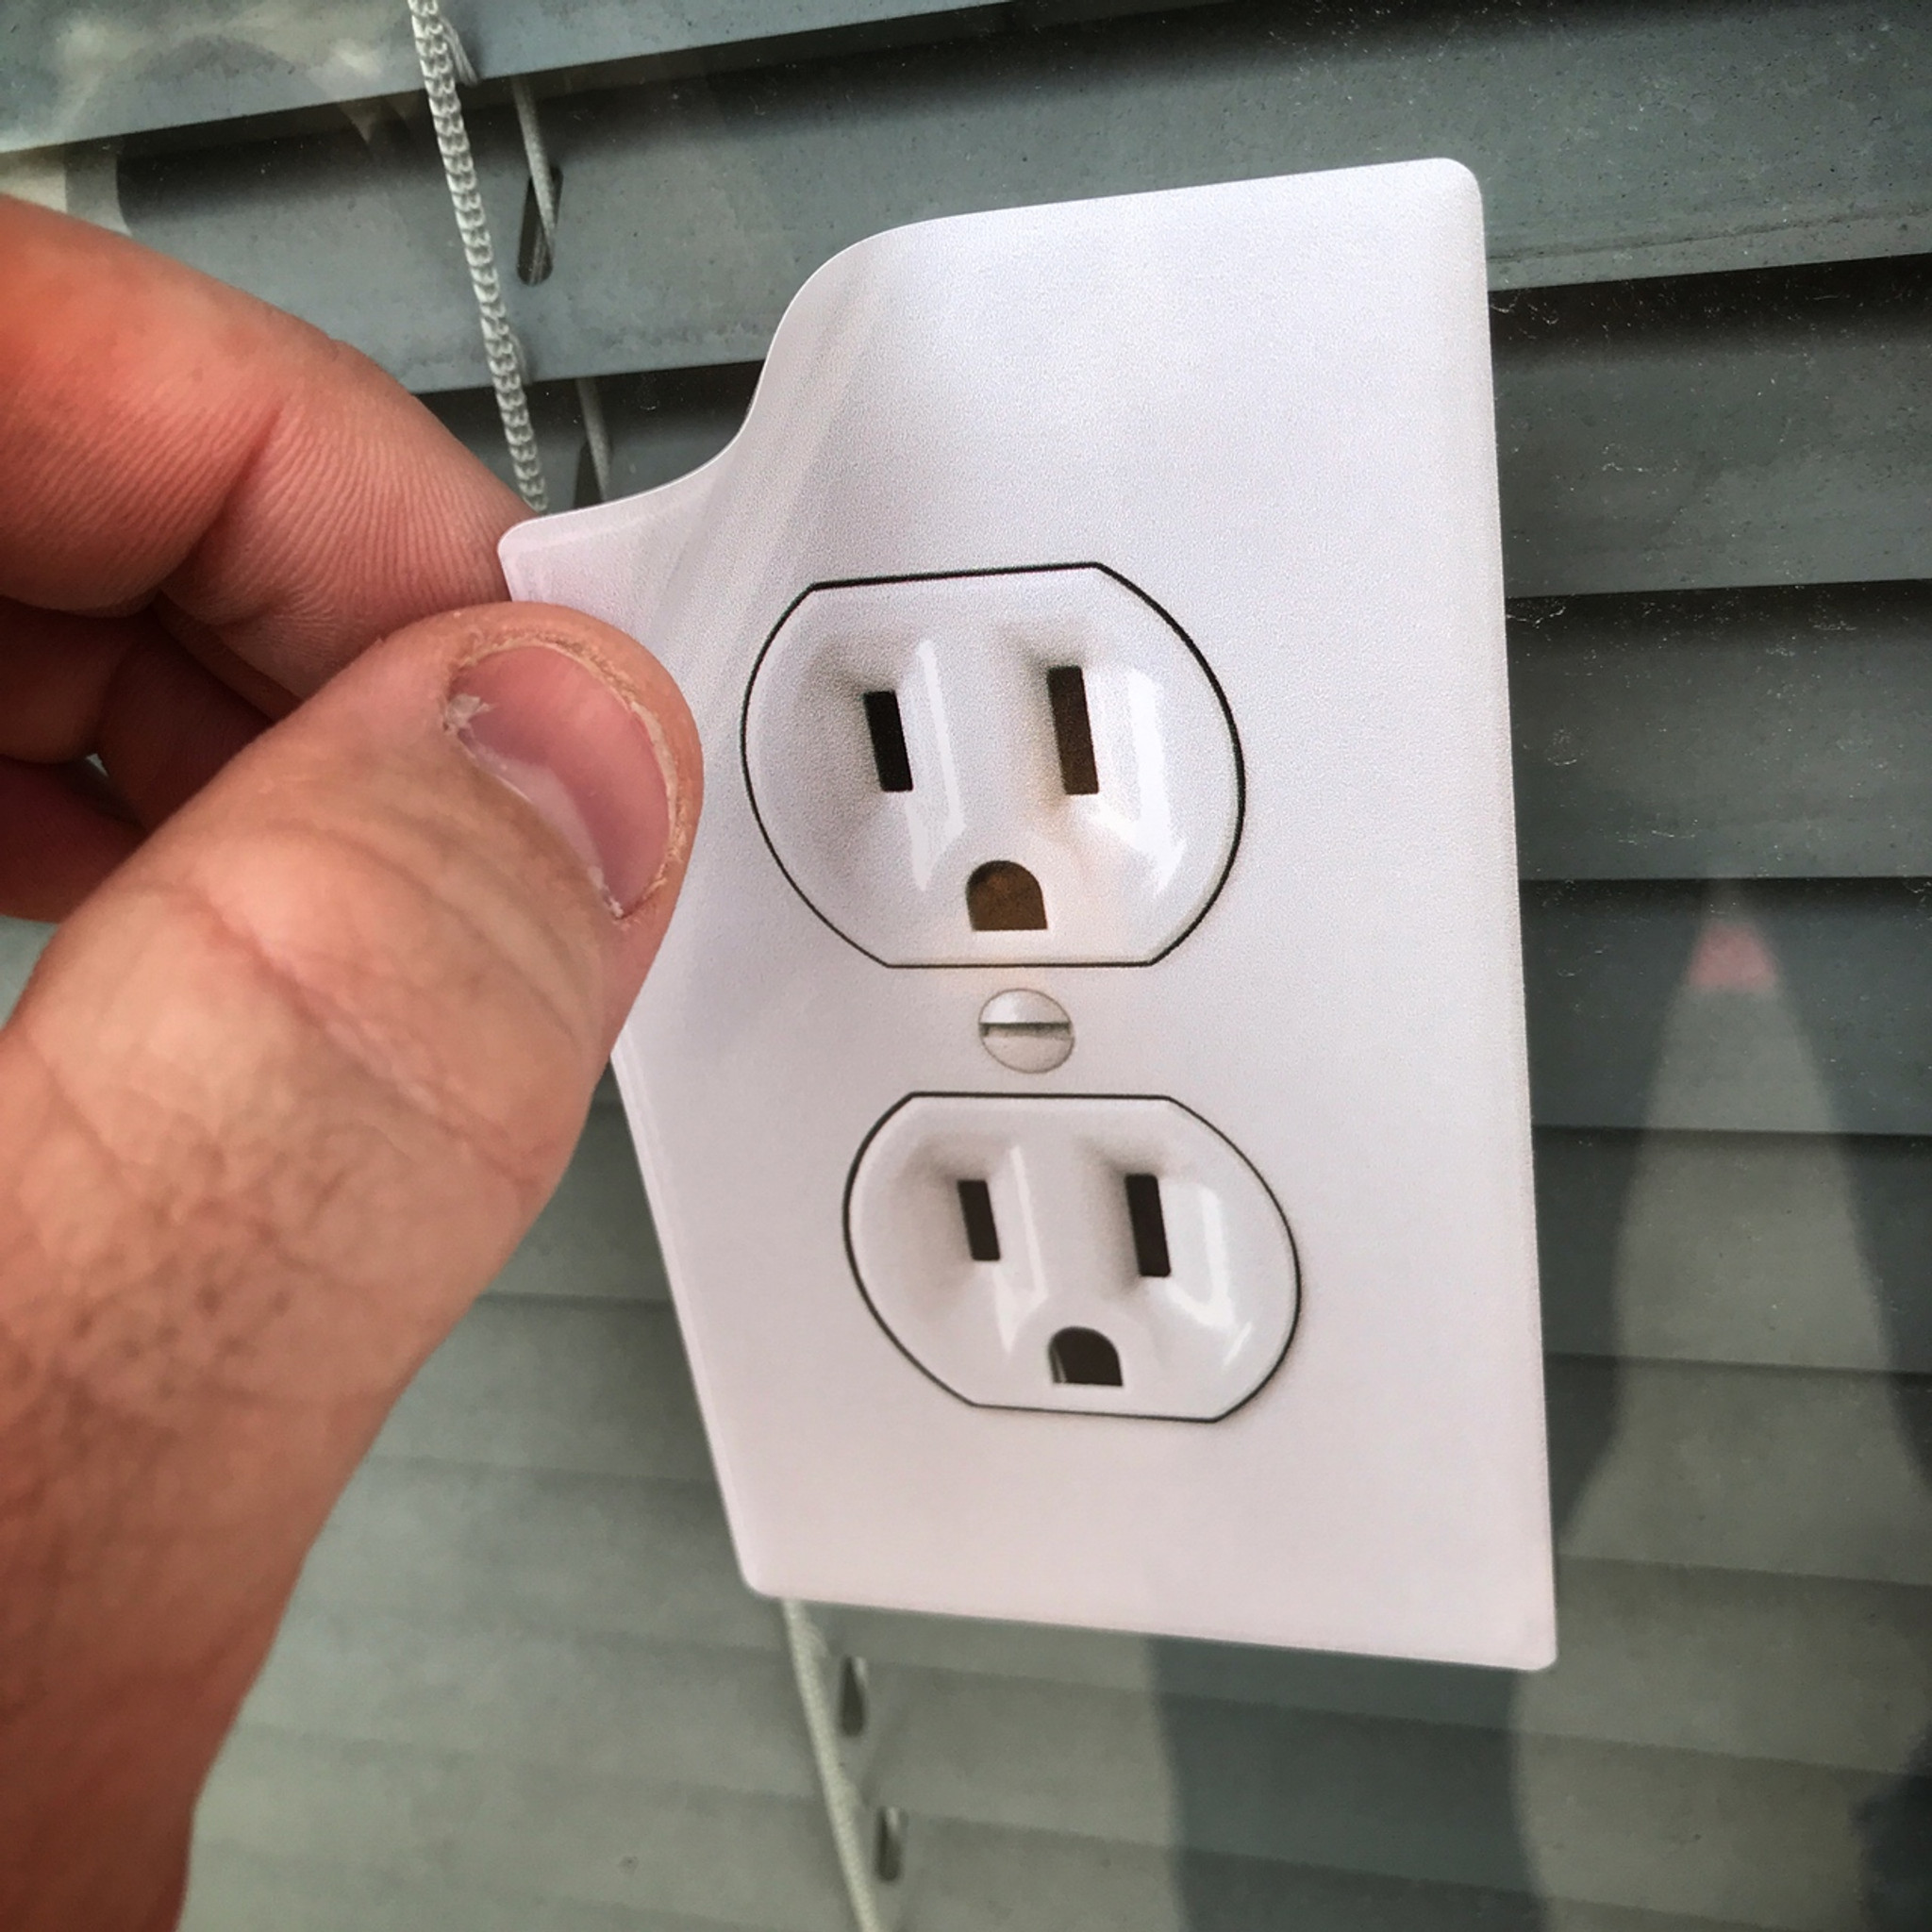 Electrical Outlet Funny Gag Prank - Sticker